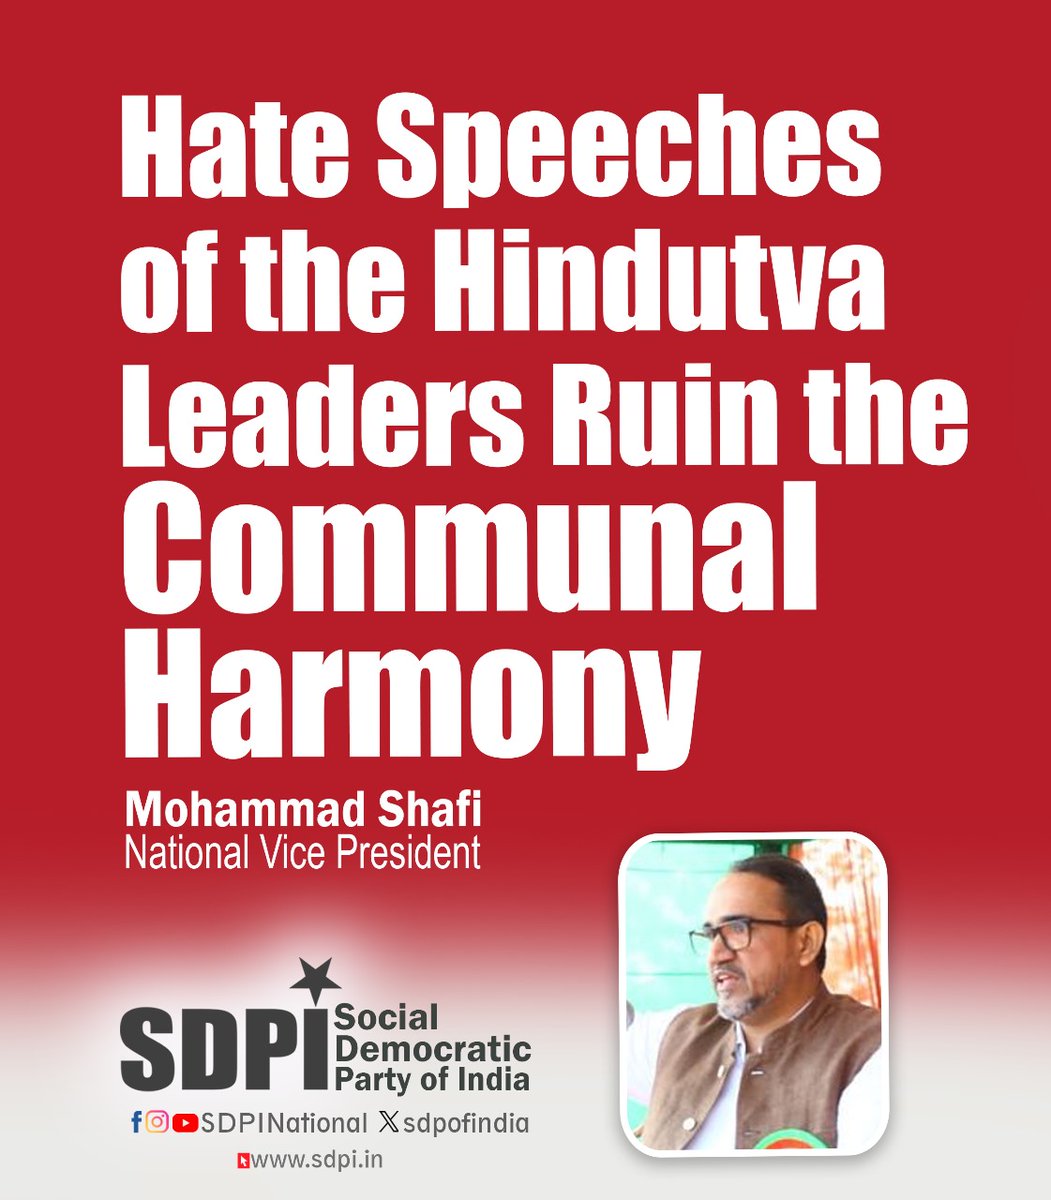 The Sangh Parivar government in the past decade has developed a mindset amongst its followers that Muslims are a group that deserves all sorts of cruelty, be it physical assault, killing, destruction of their properties, molestation of their women and girls… 
#ModiHateSpeech